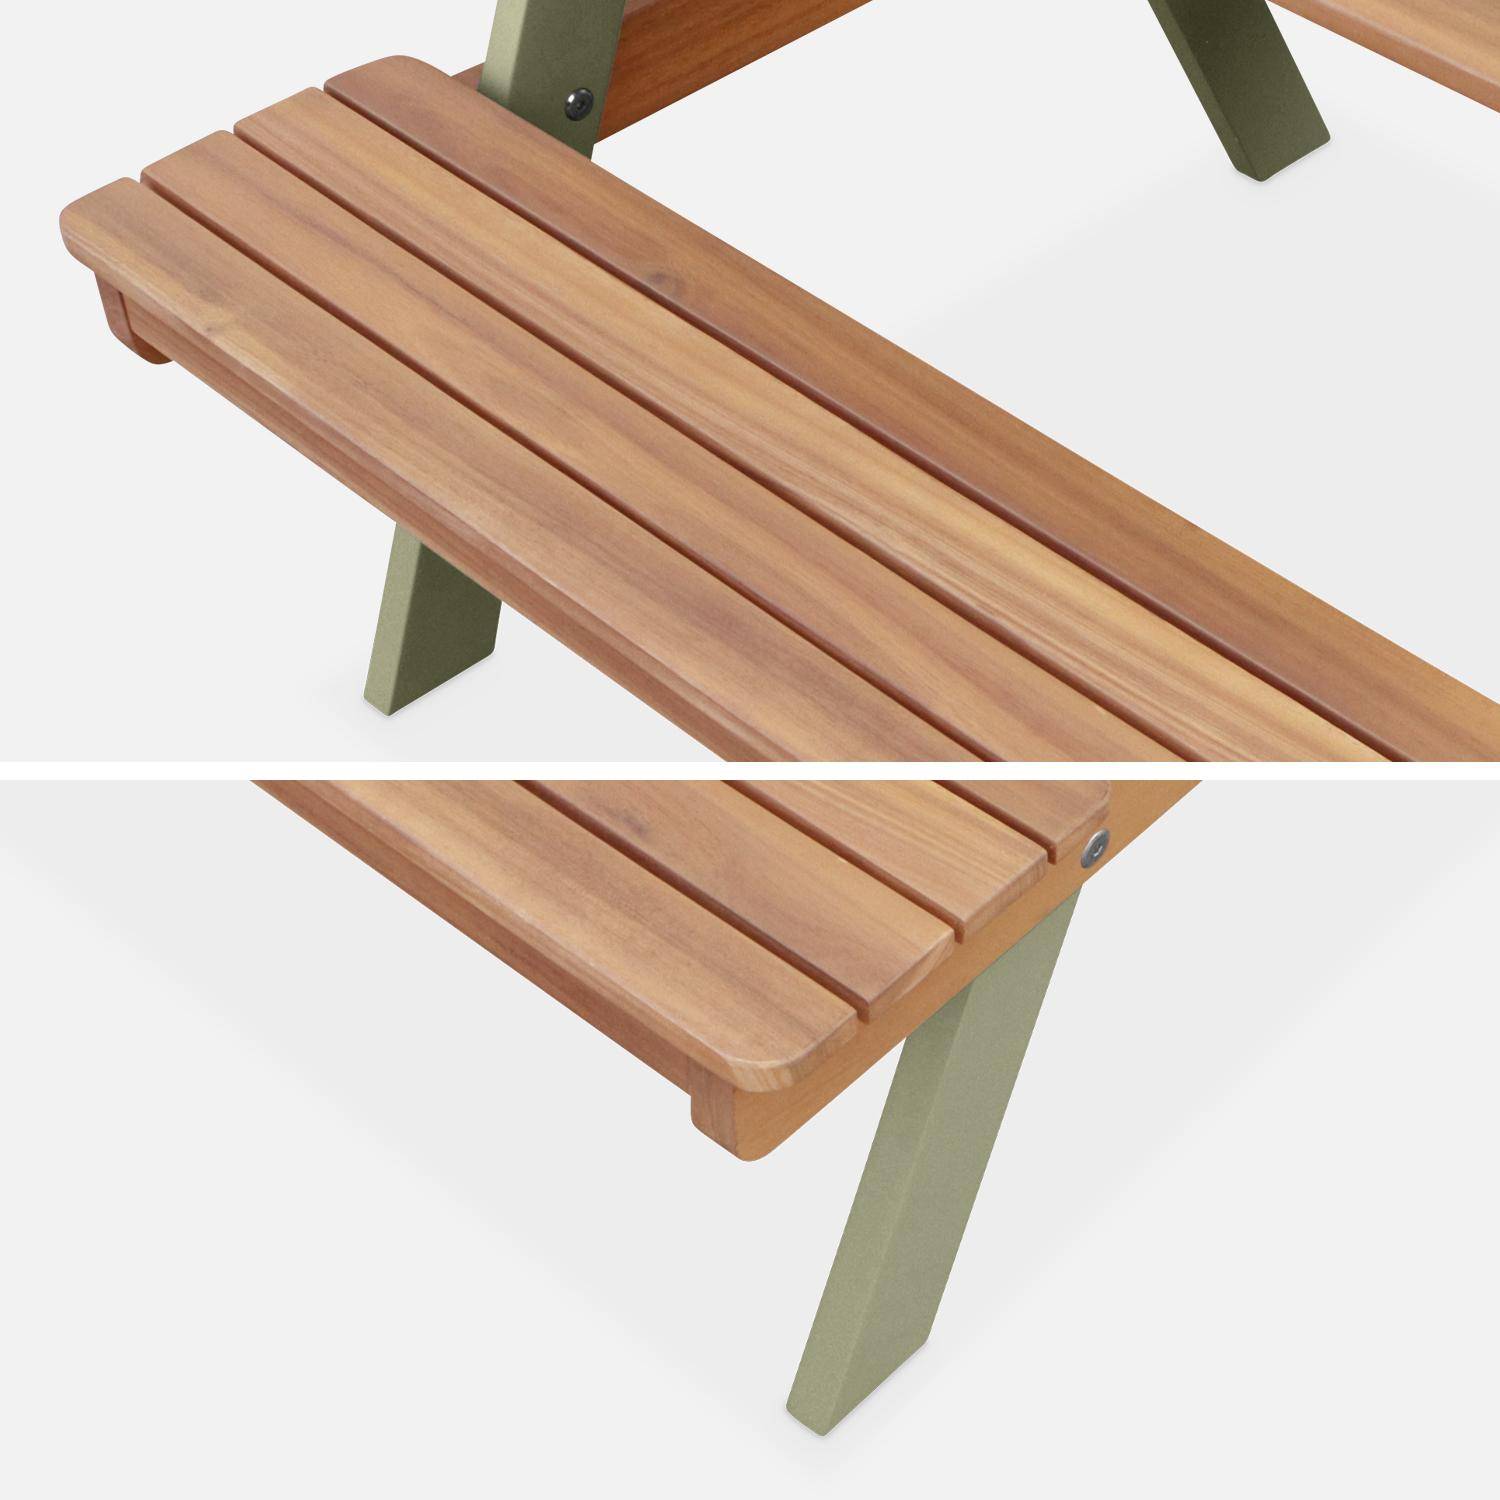 Acacia wood picnic table for children, 2 places, colour light teak and grey green,sweeek,Photo5